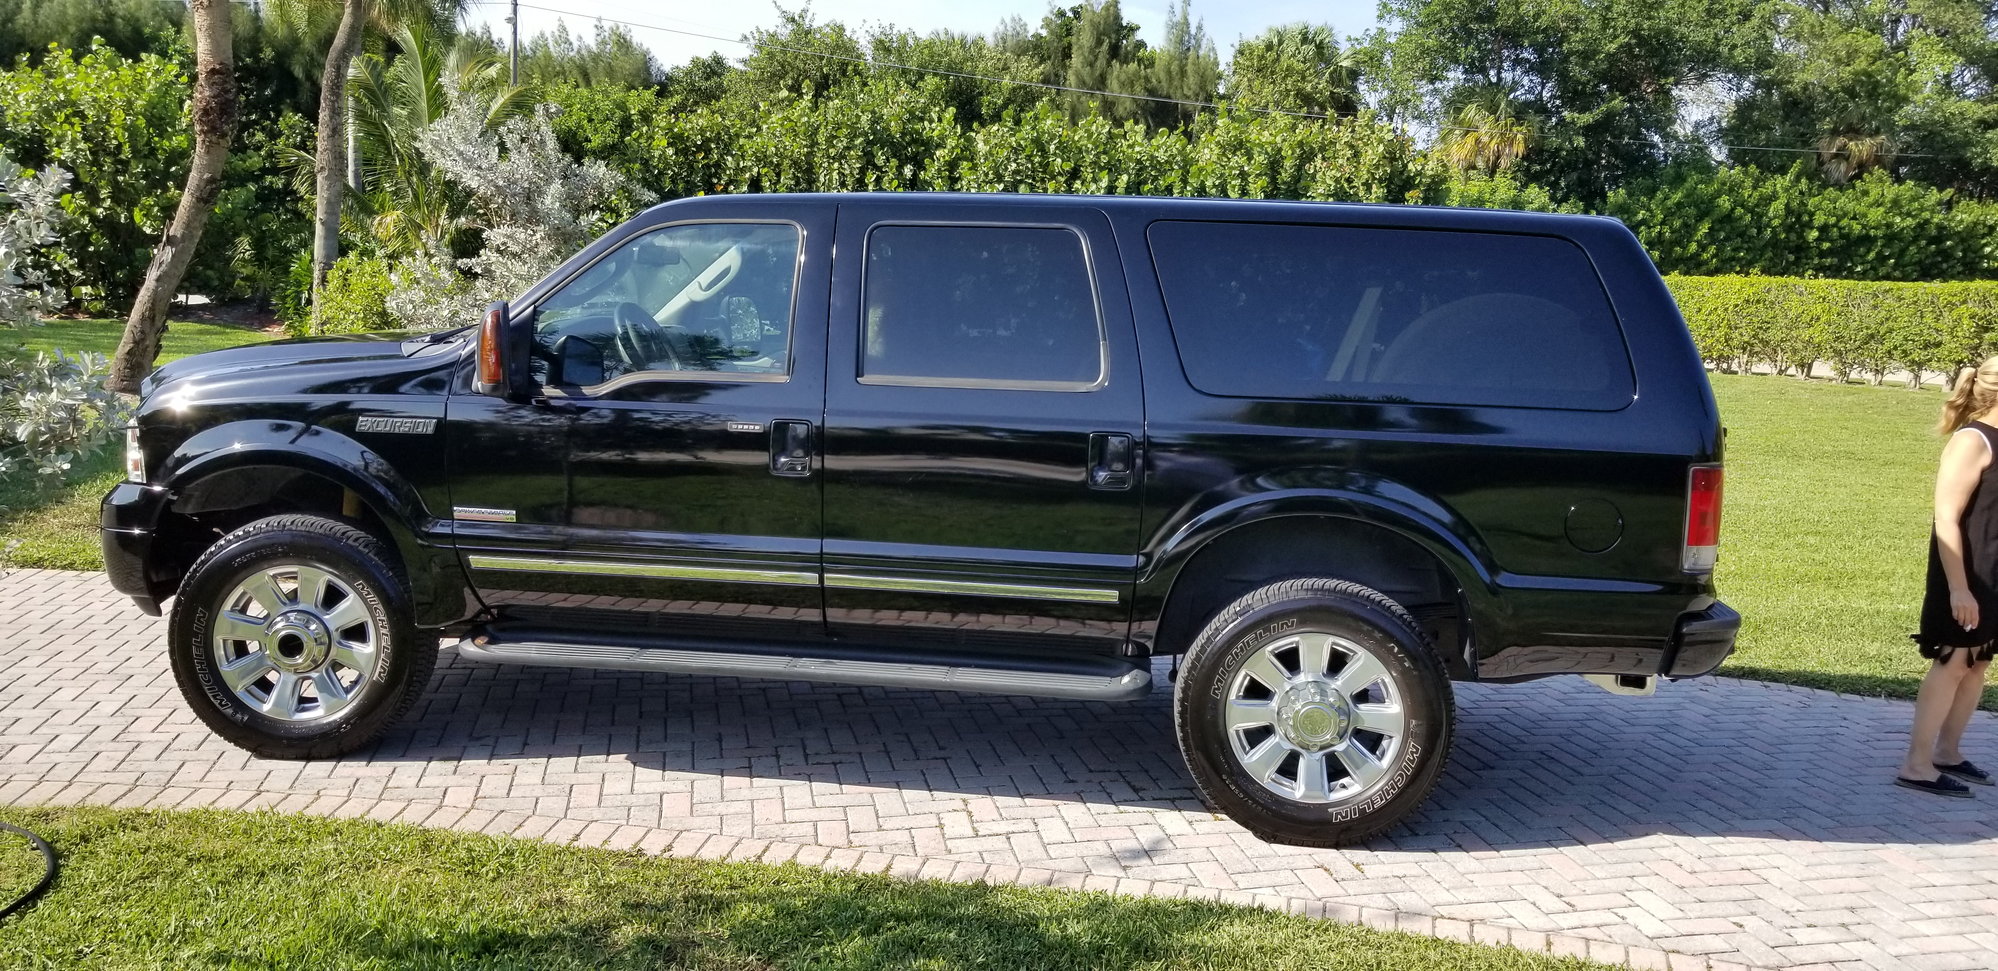 2005 ford excursion 6.0 diesel reliability